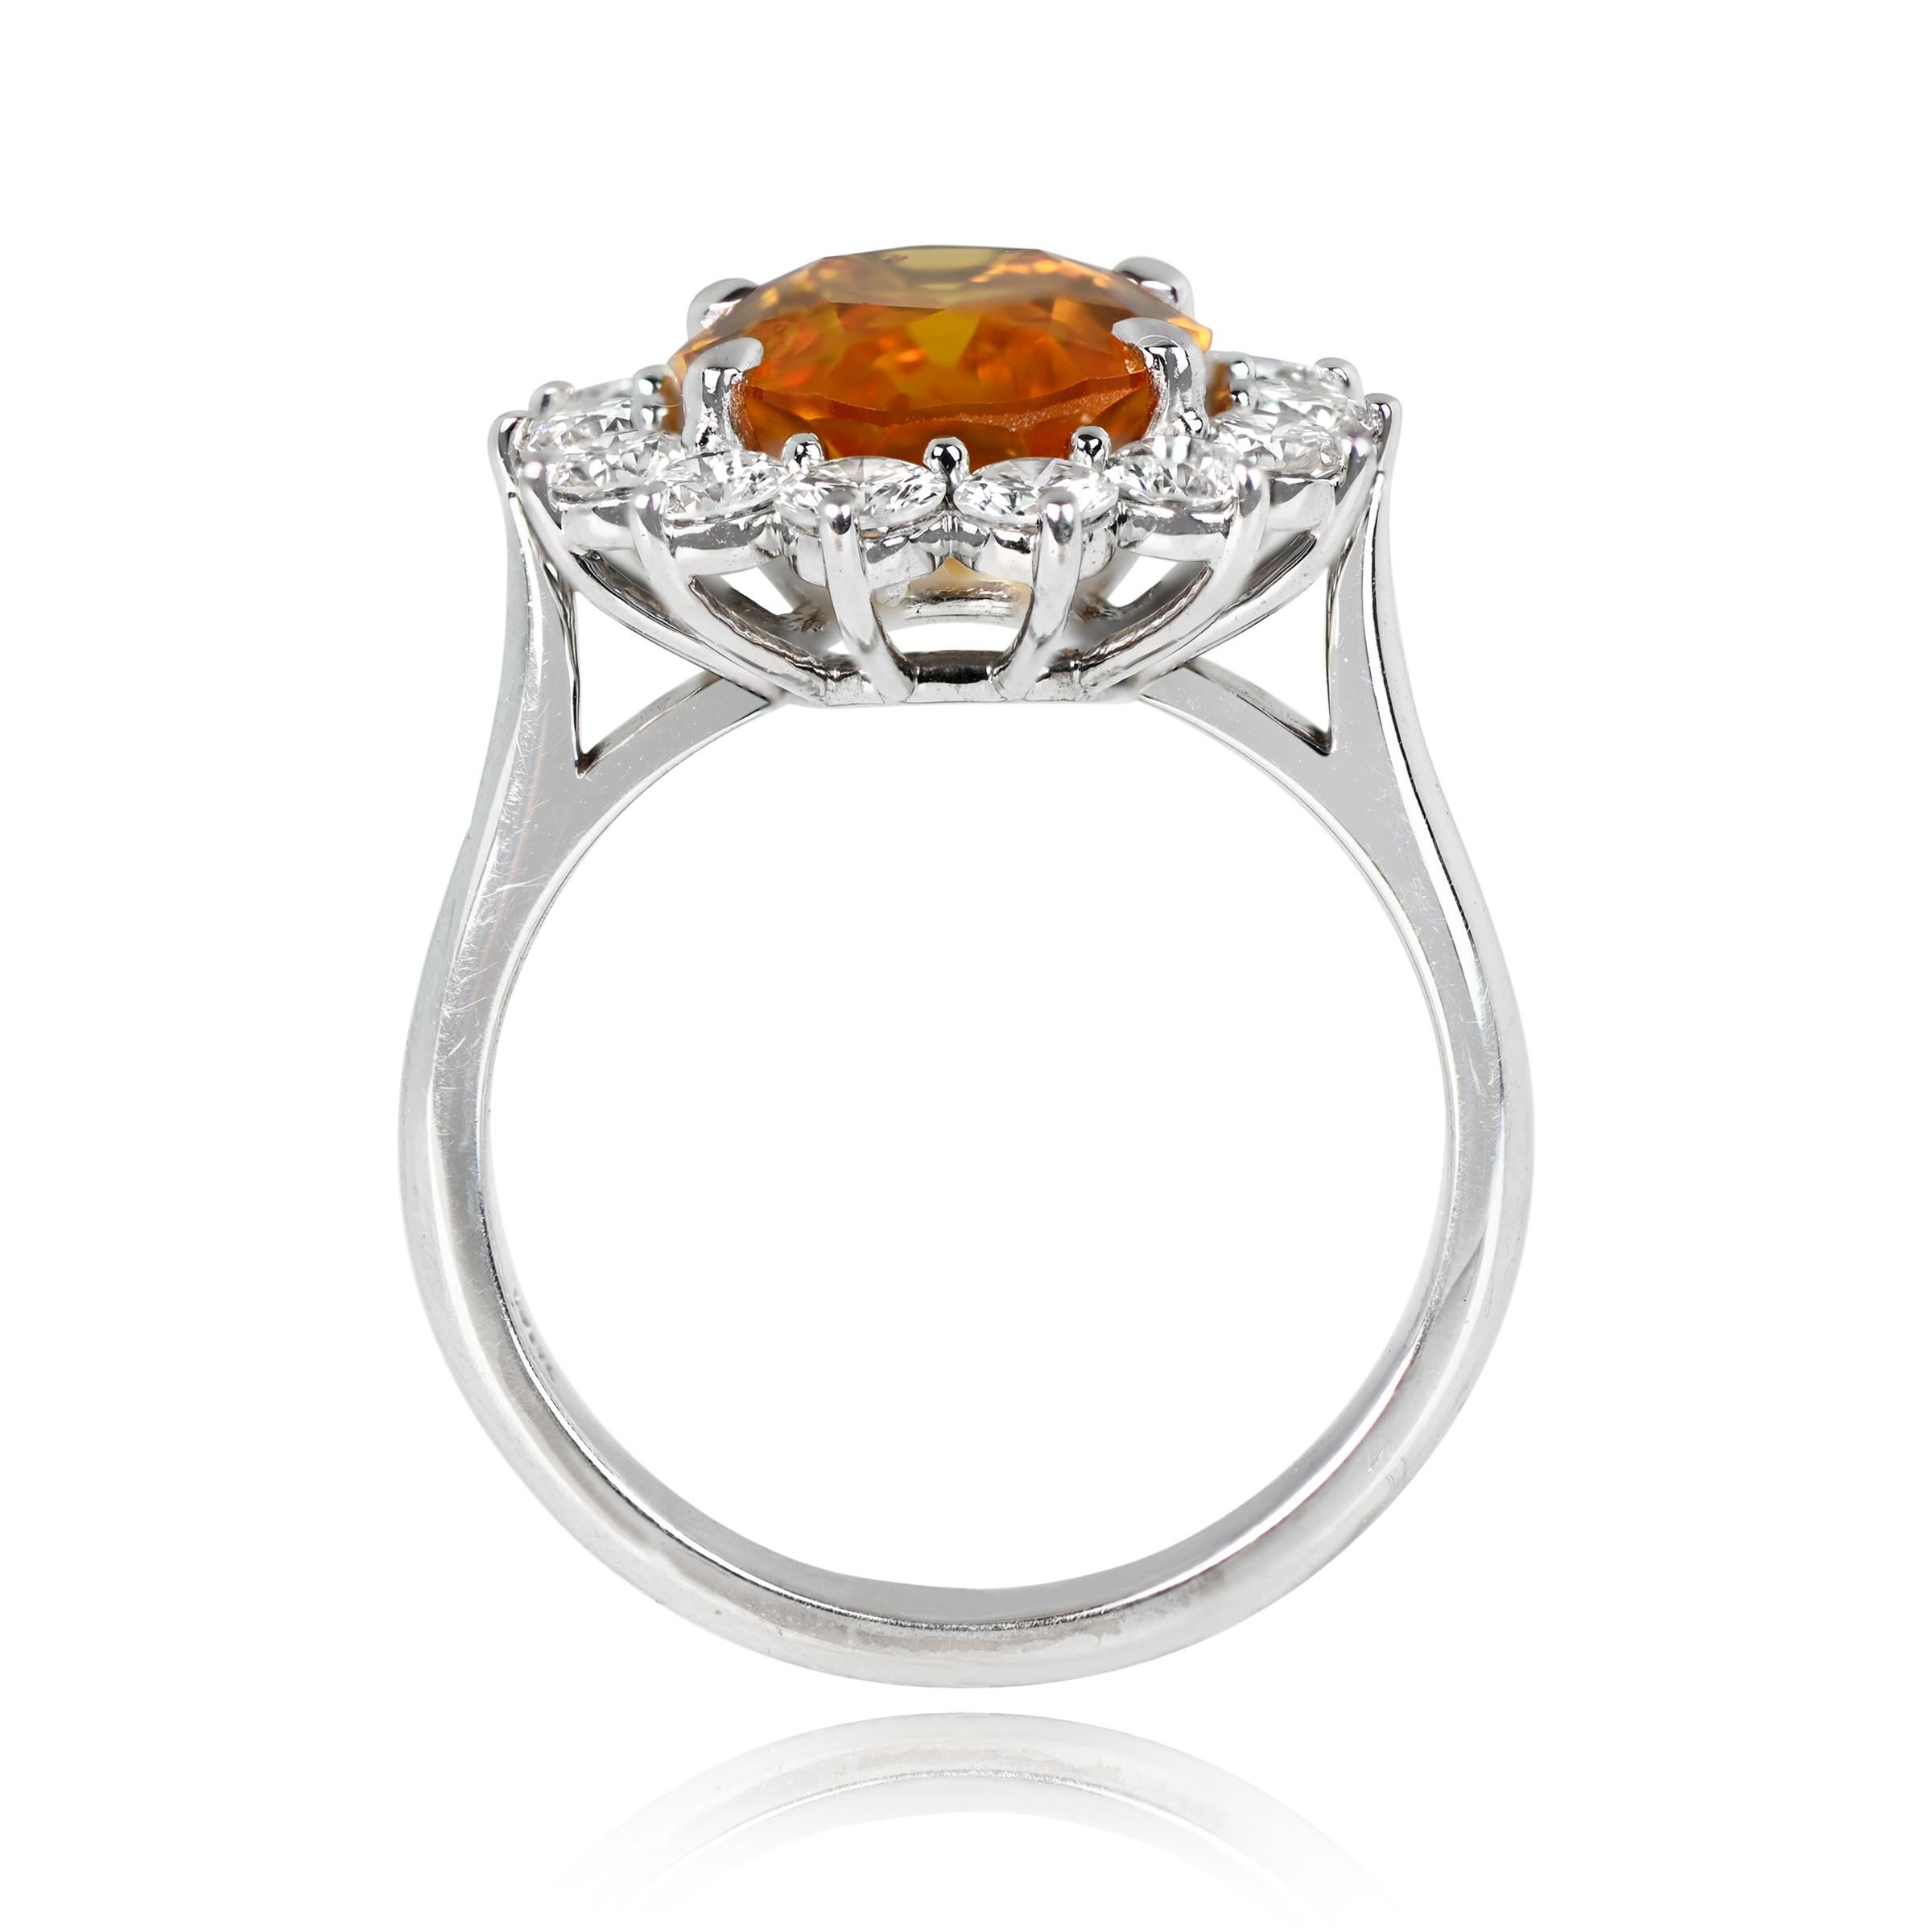 AGL 5.46ct Oval Cut Yellow Sapphire Cocktail Ring, Diamond Halo, 18k White Gold In Excellent Condition For Sale In New York, NY